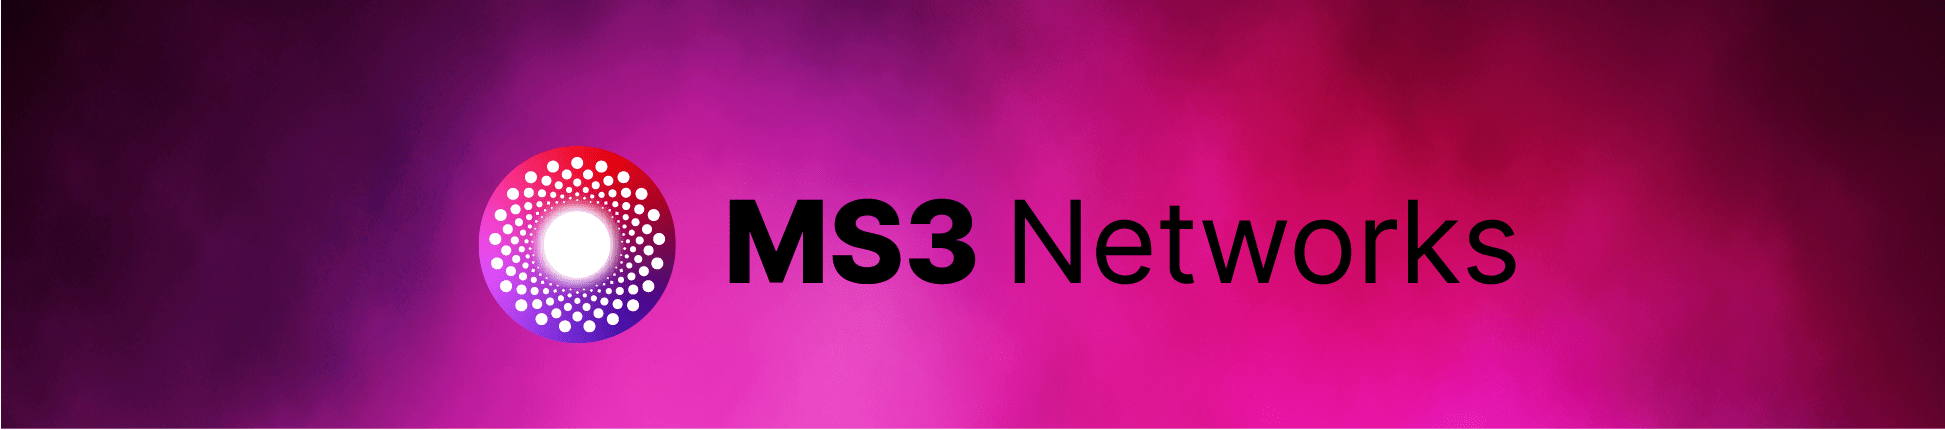 MS3 Networks Banner